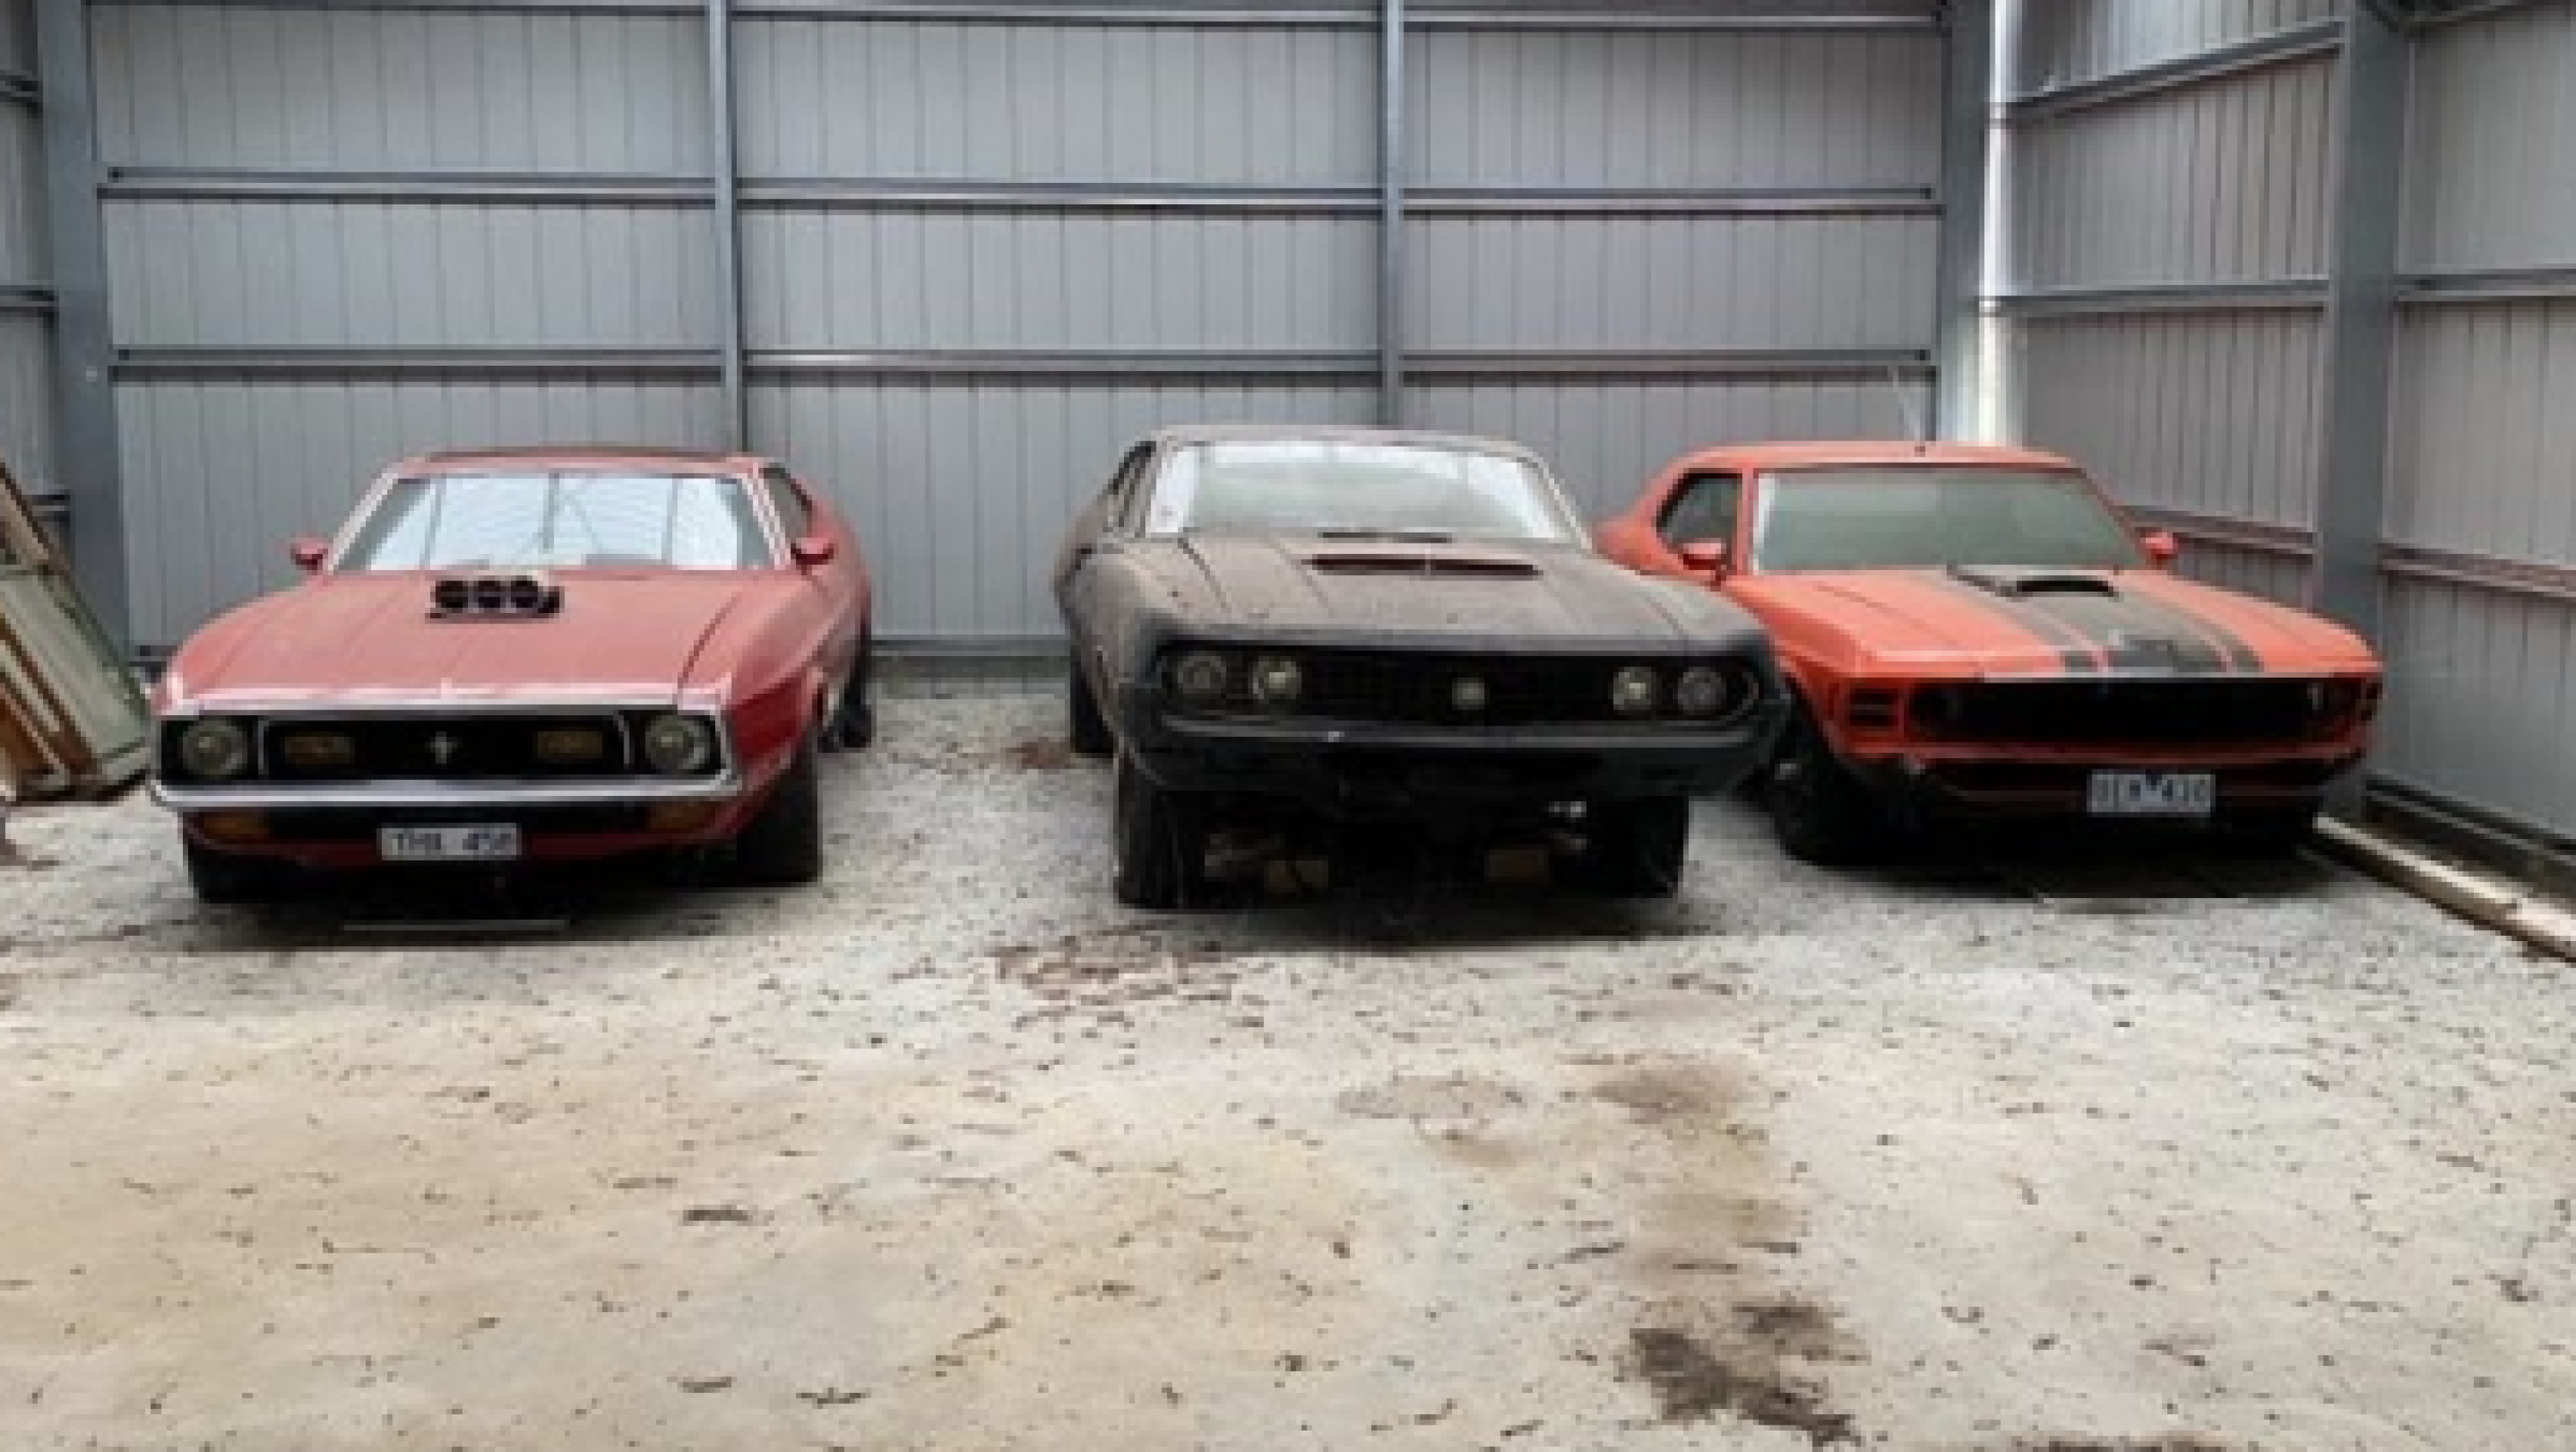 1f572a39/1971 ford mustang 1970 ford mustang 1971 ford torino restore project group femke koenders crop png